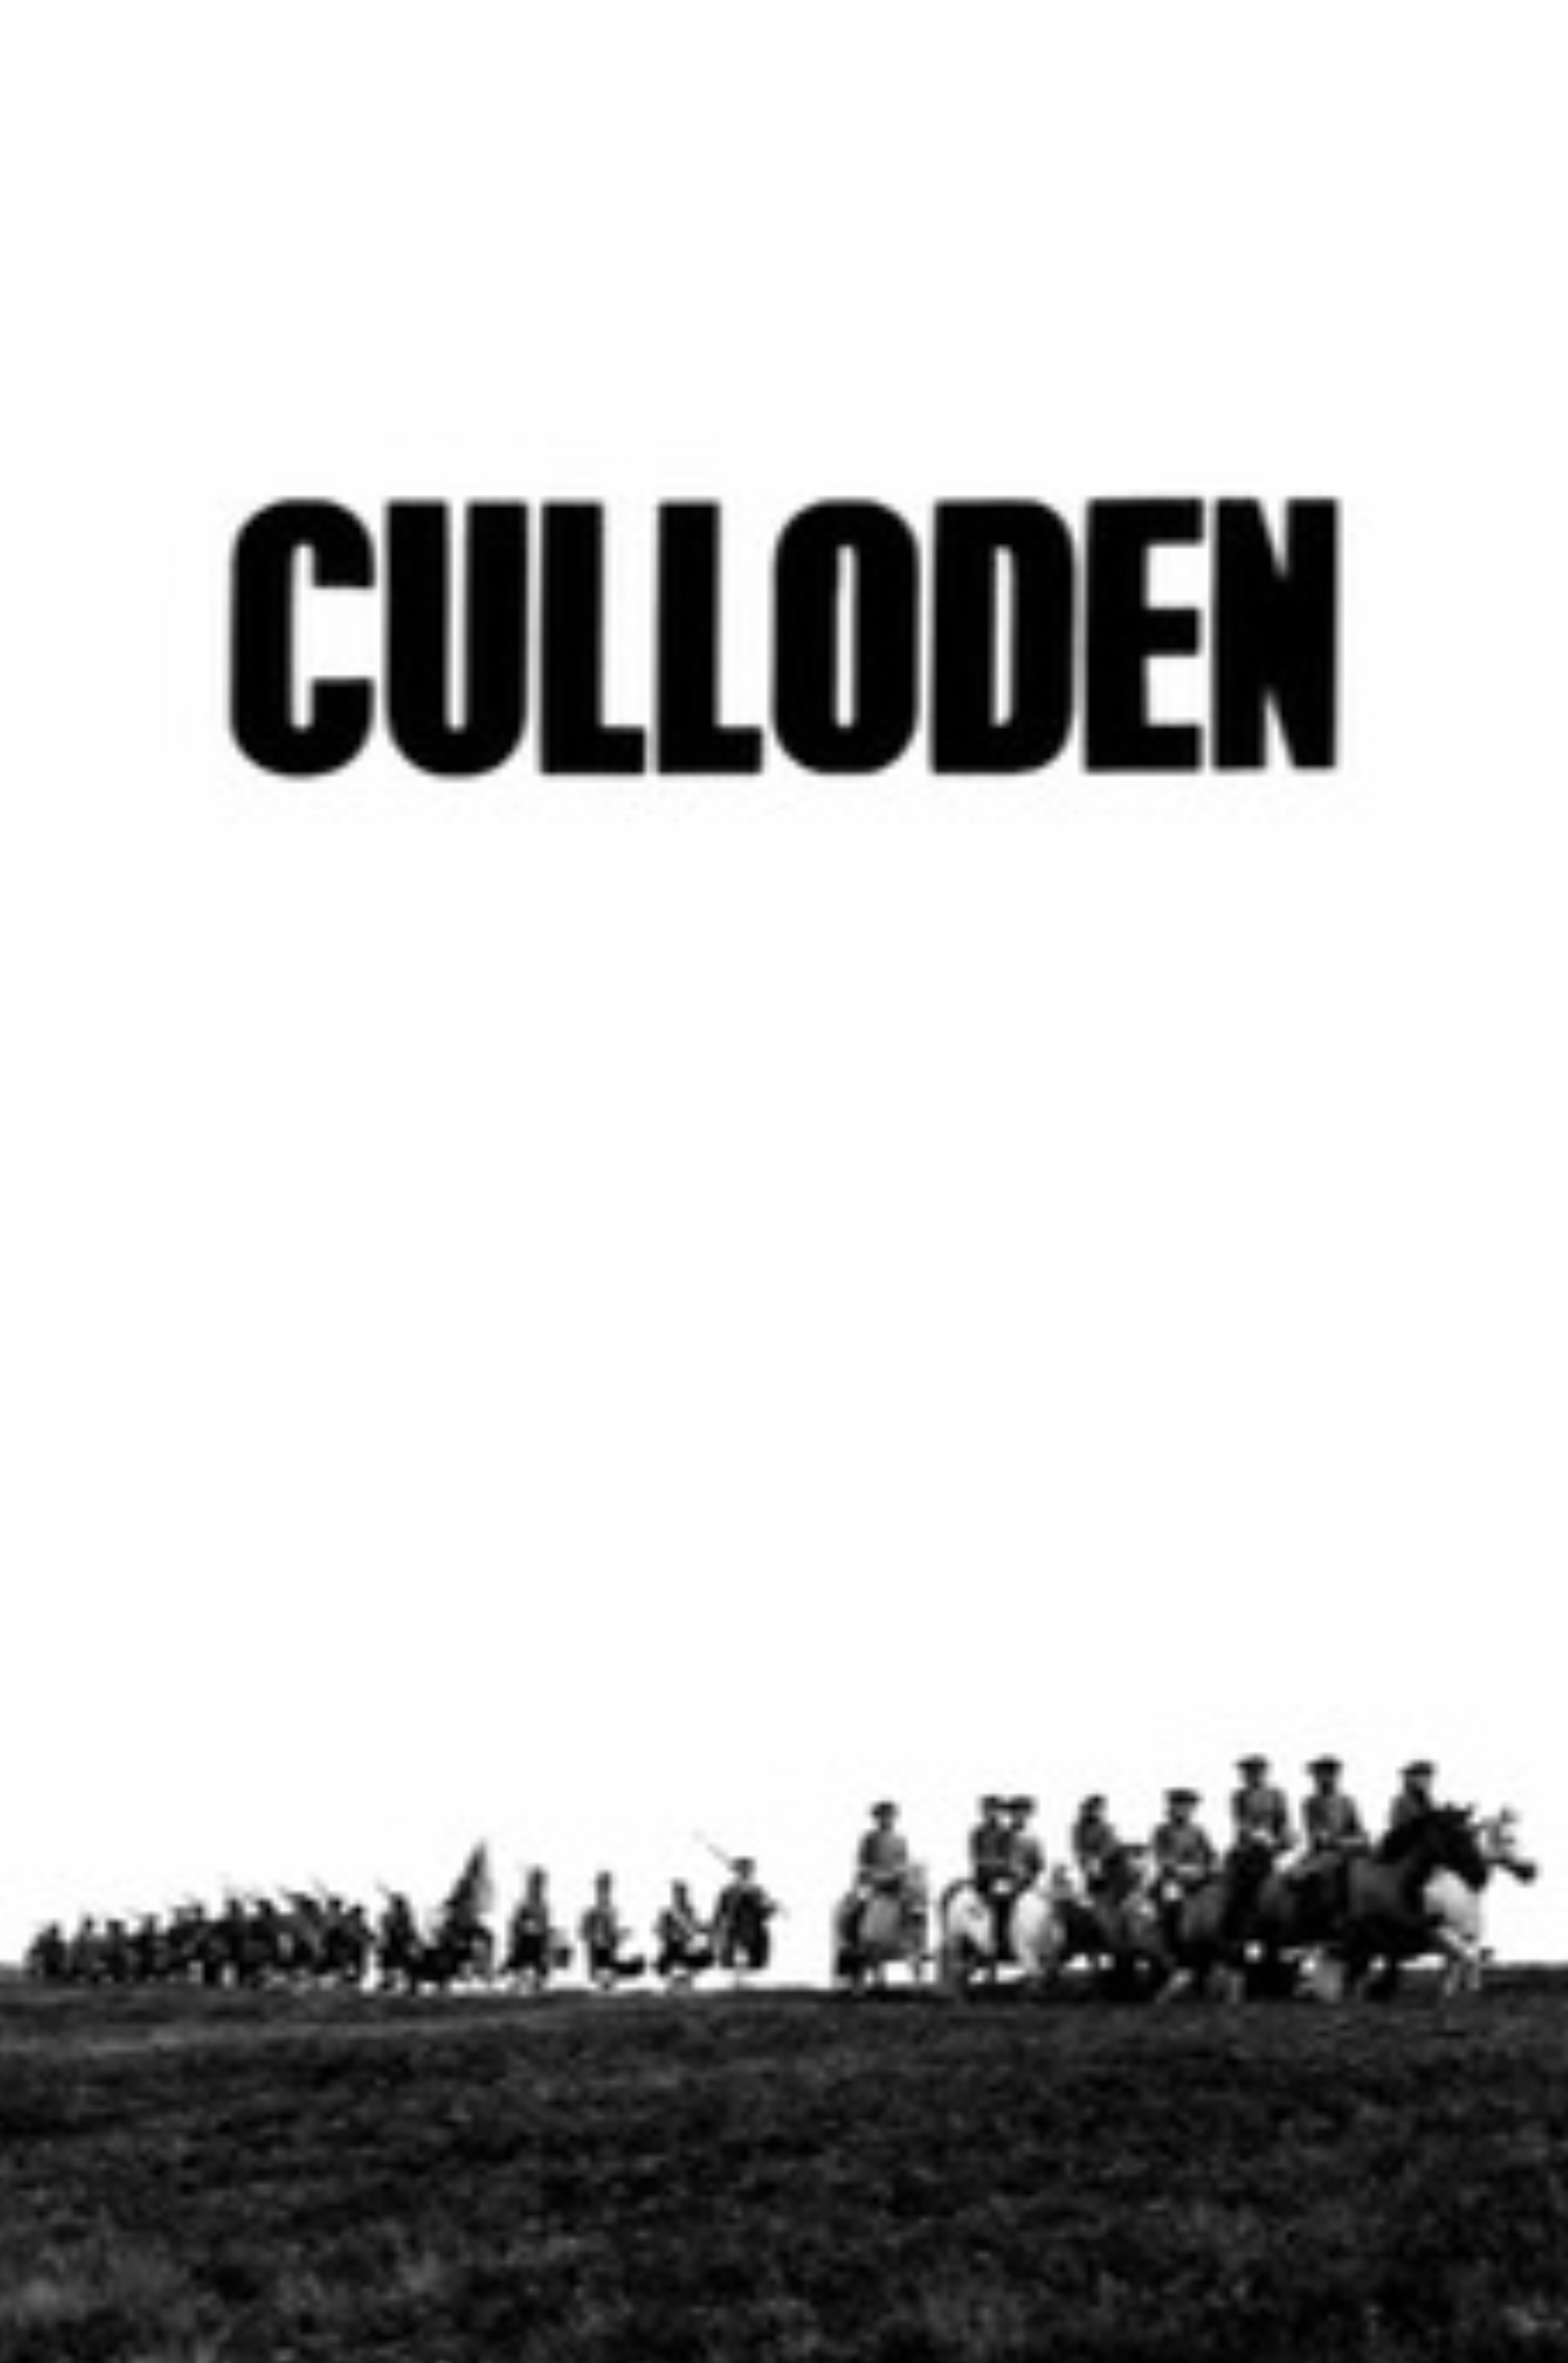 Culloden (1964) with English Subtitles on DVD on DVD